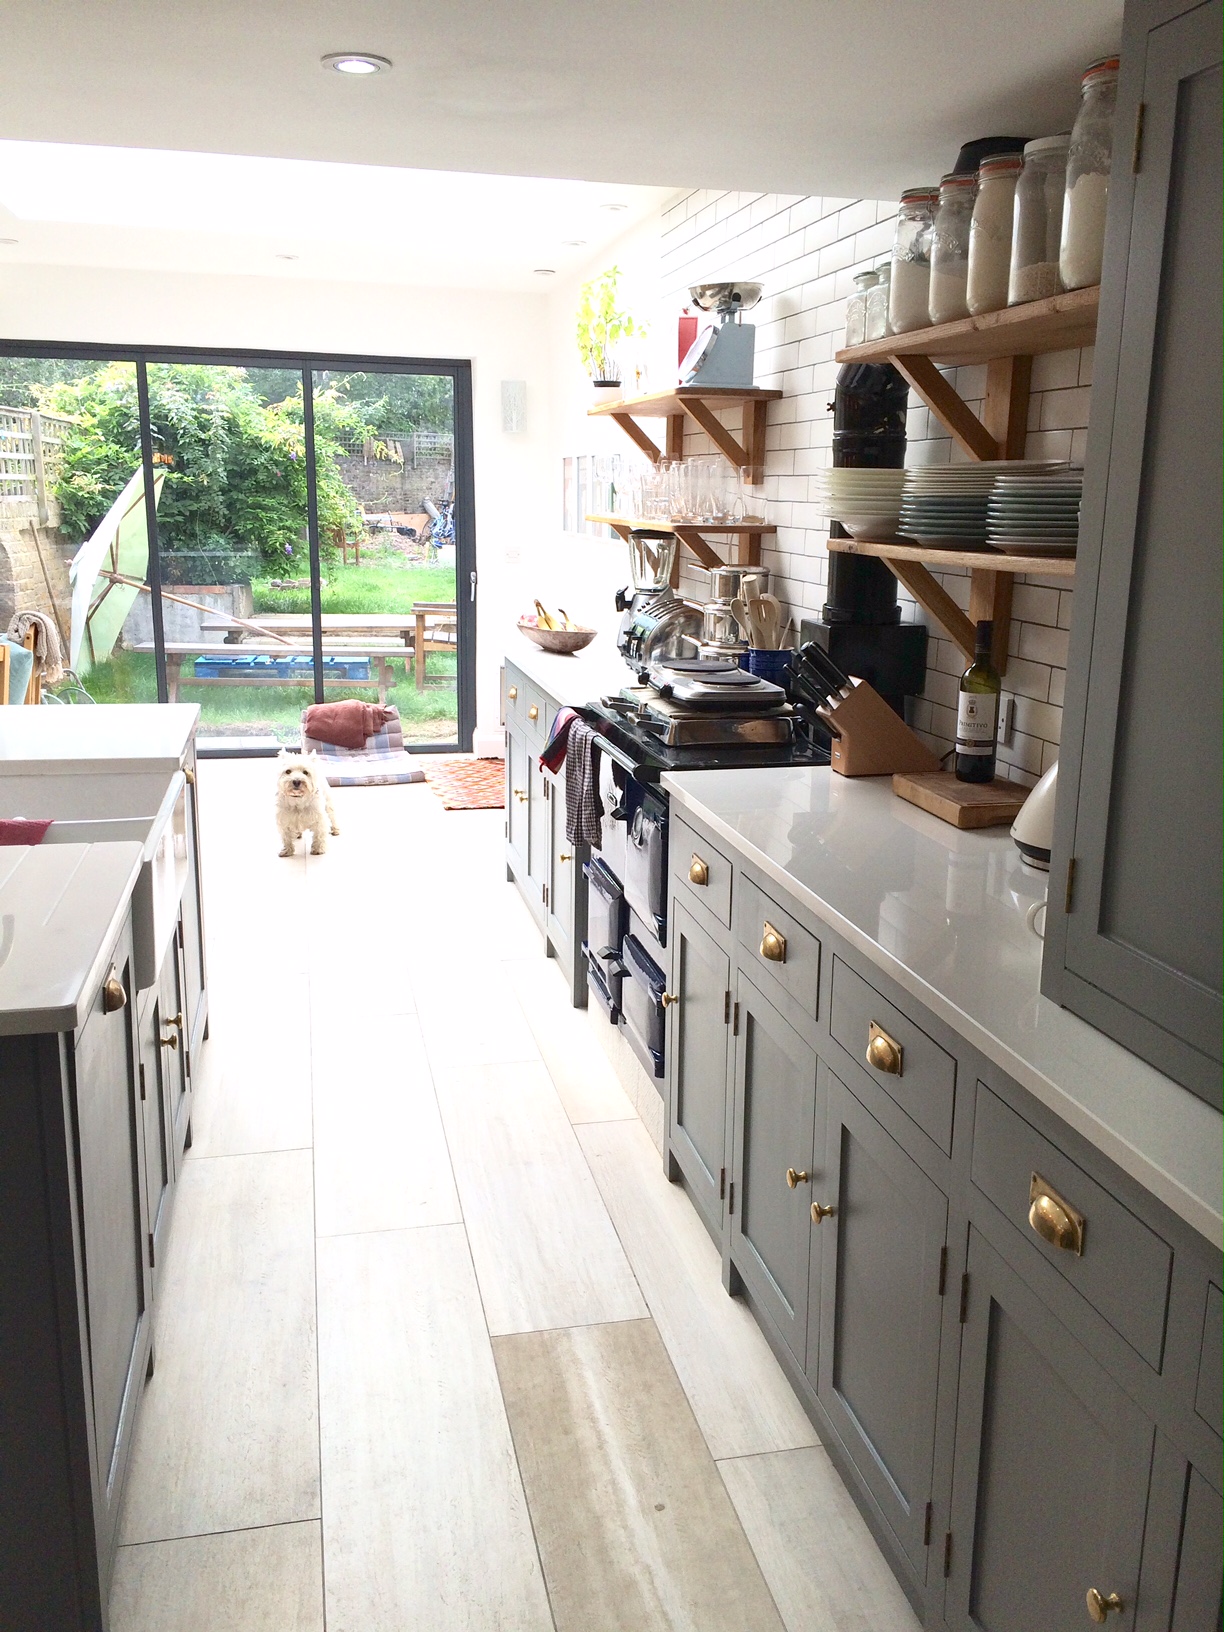 Fully bespoke,shaker style kitchen hand made from solid wood.Feature, individually tailored island site.